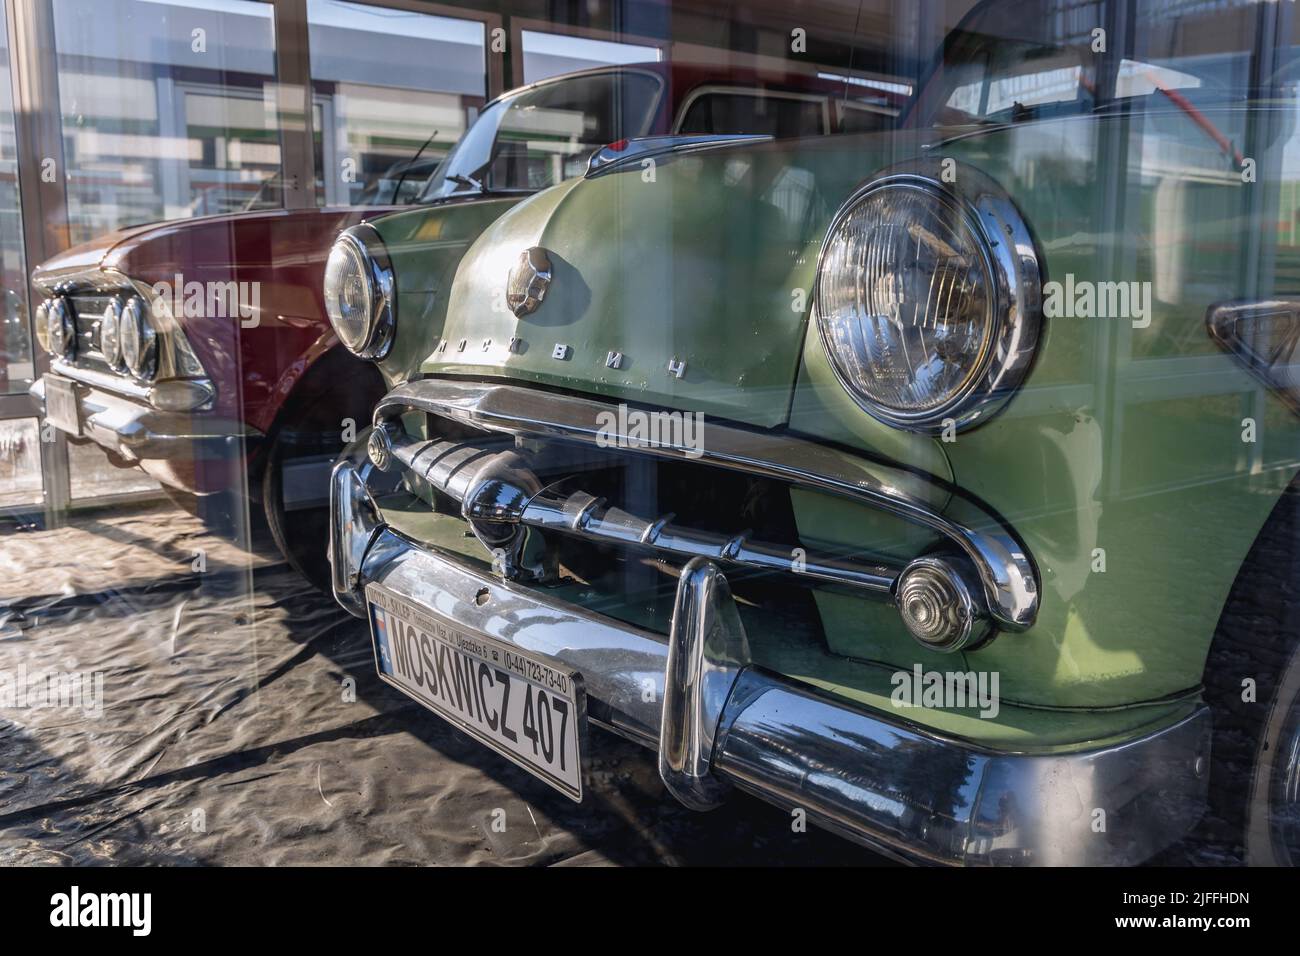 Moskvitch 407 cars on a permanent exhibition of classic car on a Moya gas station on a S8 expressway near Rawa Mazowiecka, Poland Stock Photo